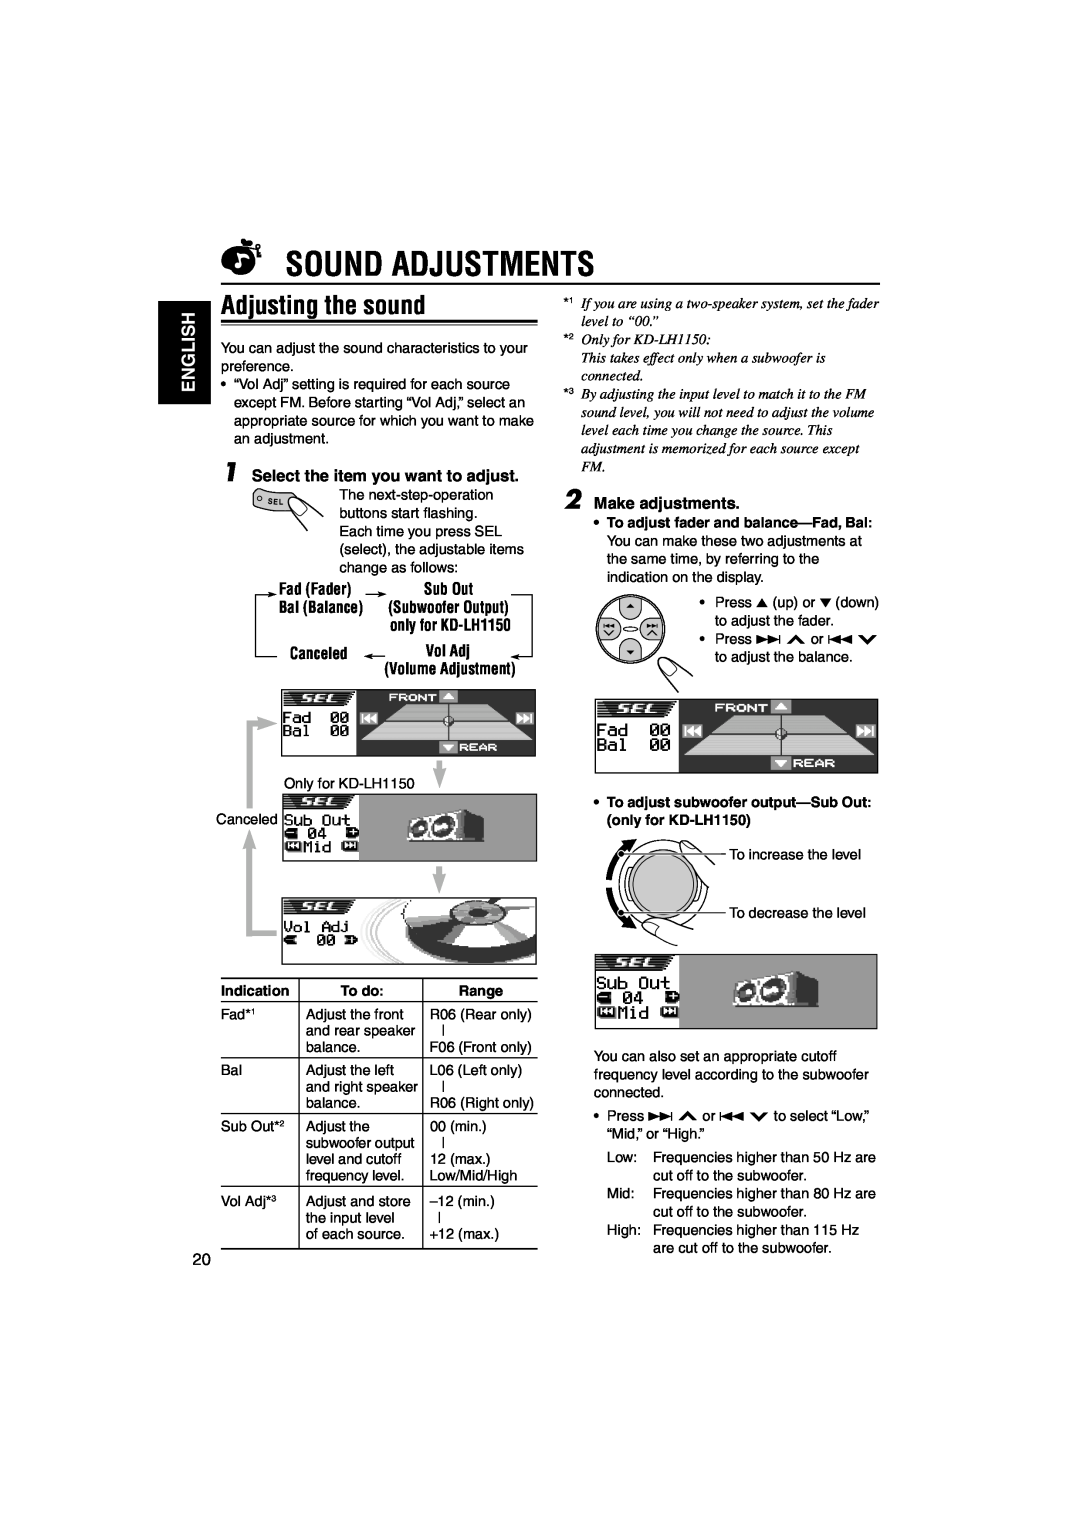 JVC KD-LH1150 Sound Adjustments, Adjusting the sound, English, Select the item you want to adjust, Fad Fader, Canceled 